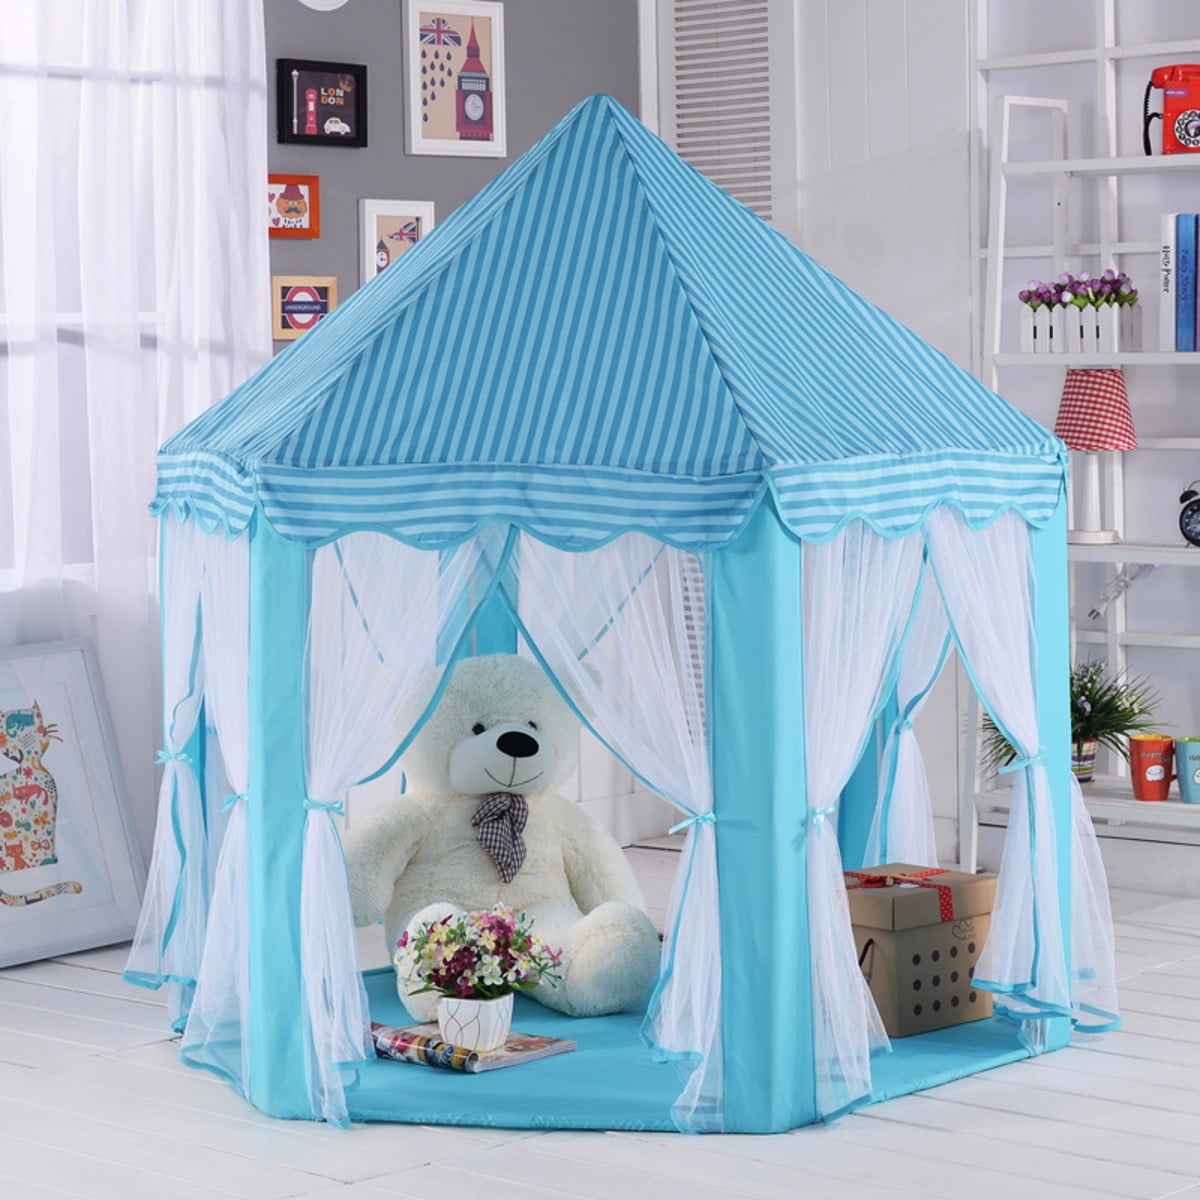 Details about   New Children Kids Play Tent Princess Girls Boys Hexagon Playhouse House gift toy 